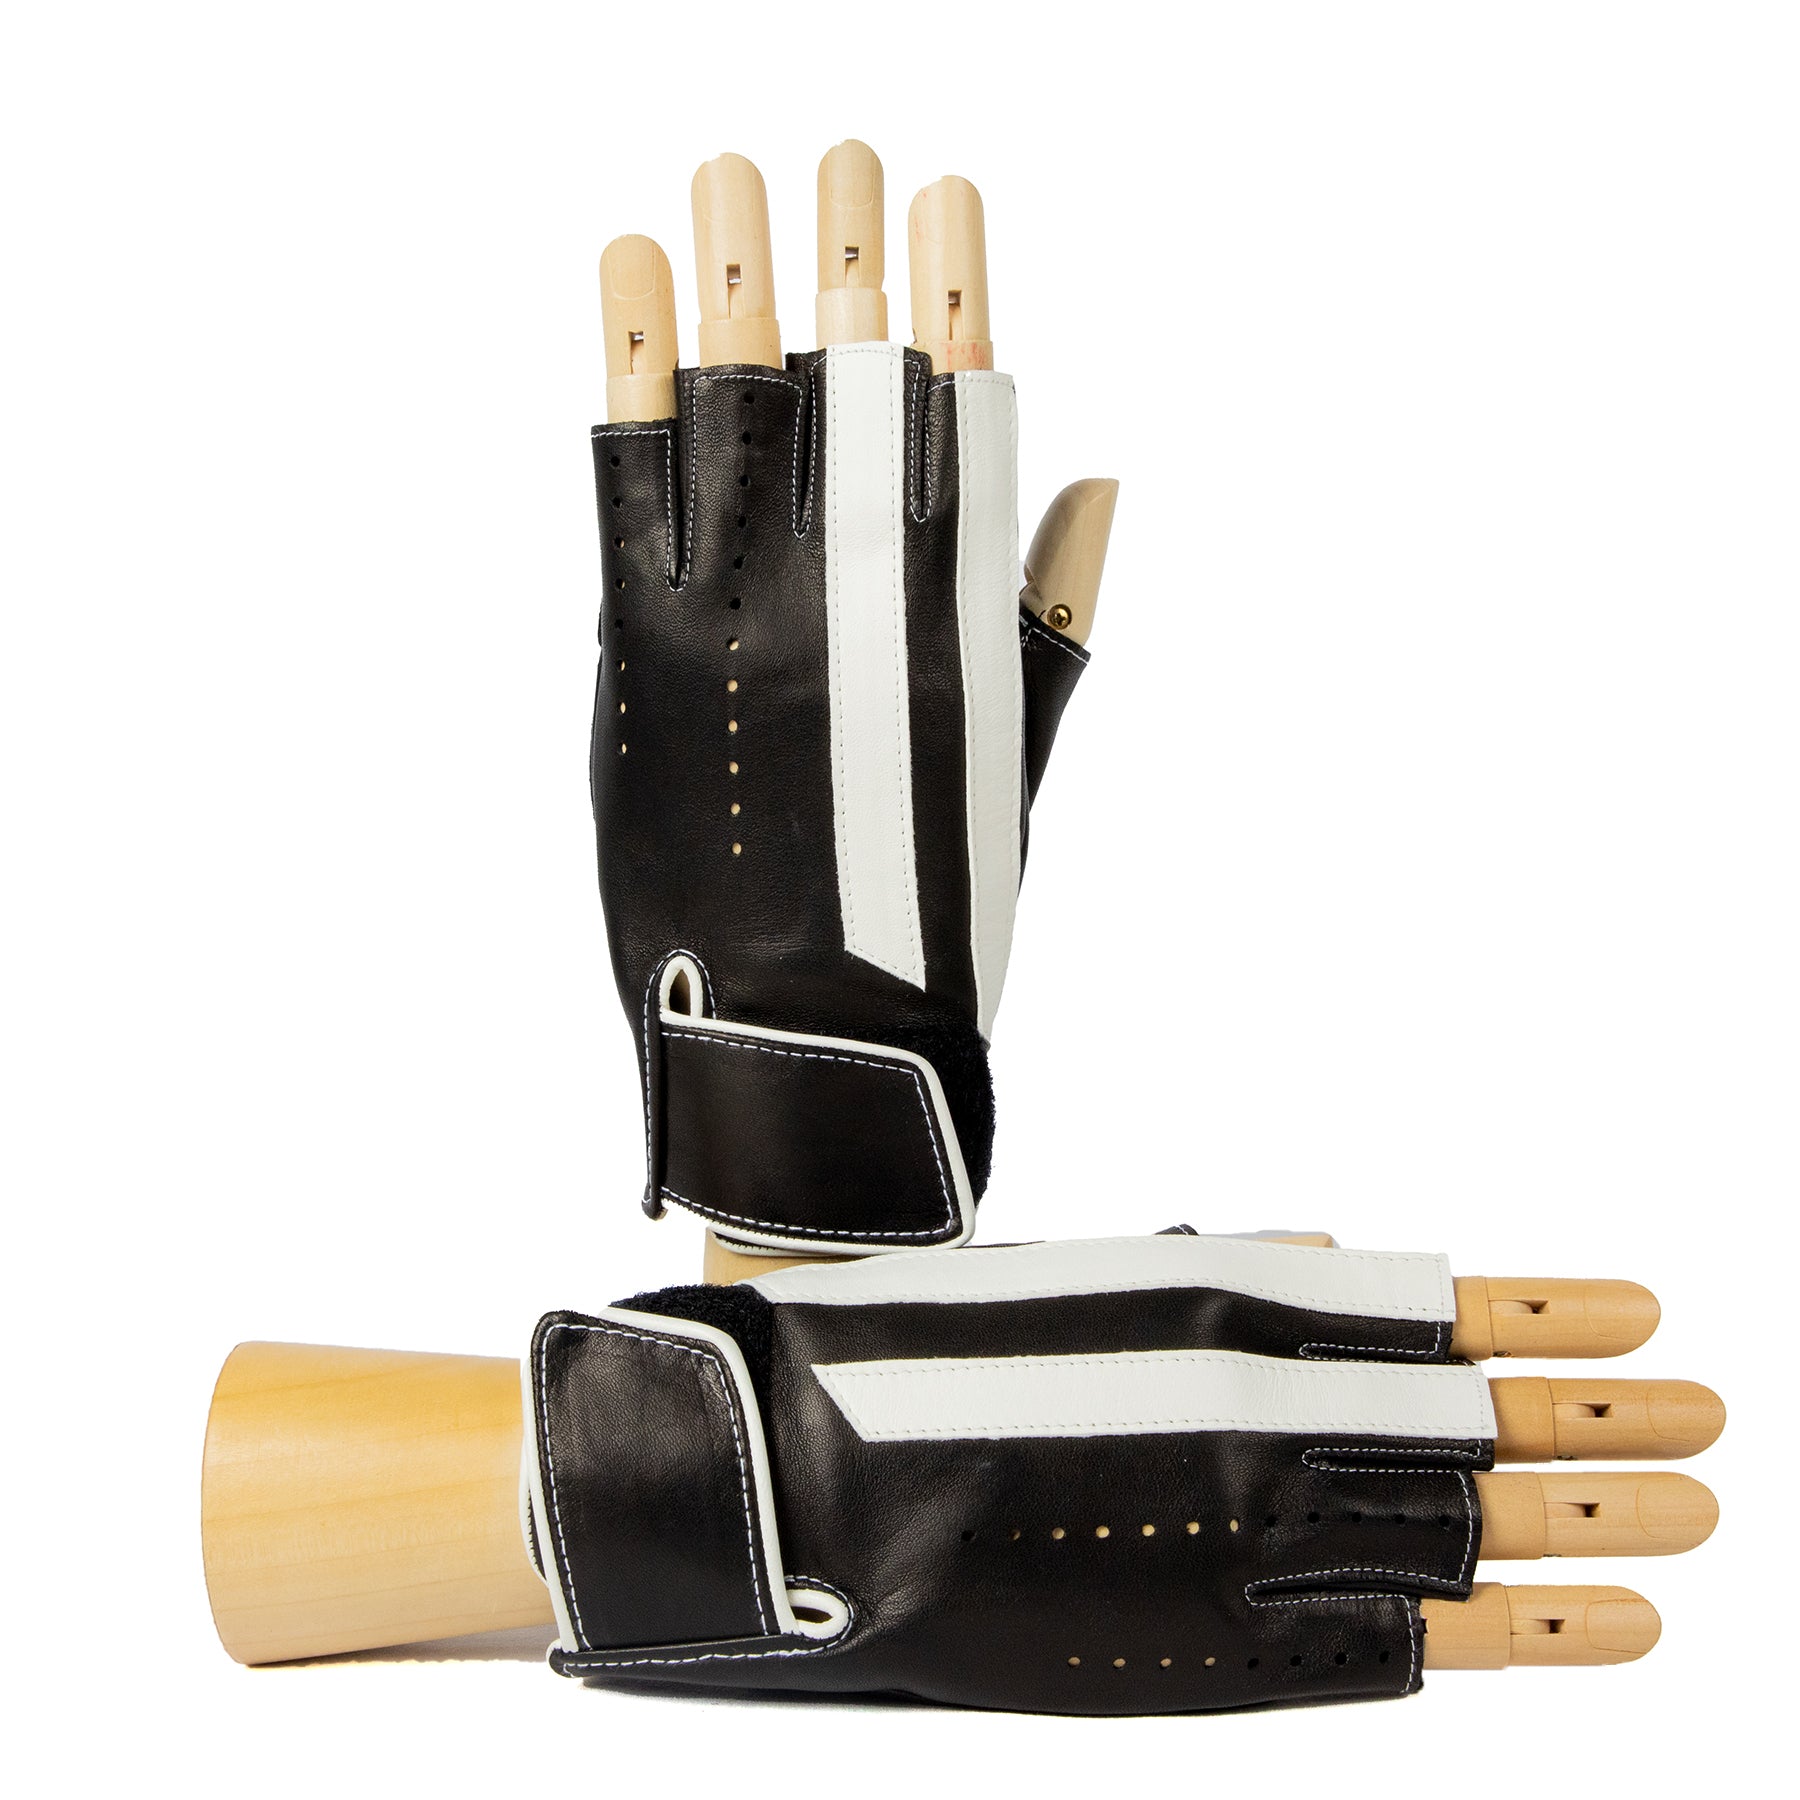 Men's unlined half fingers driving gloves in black nappa leather with white leather strips